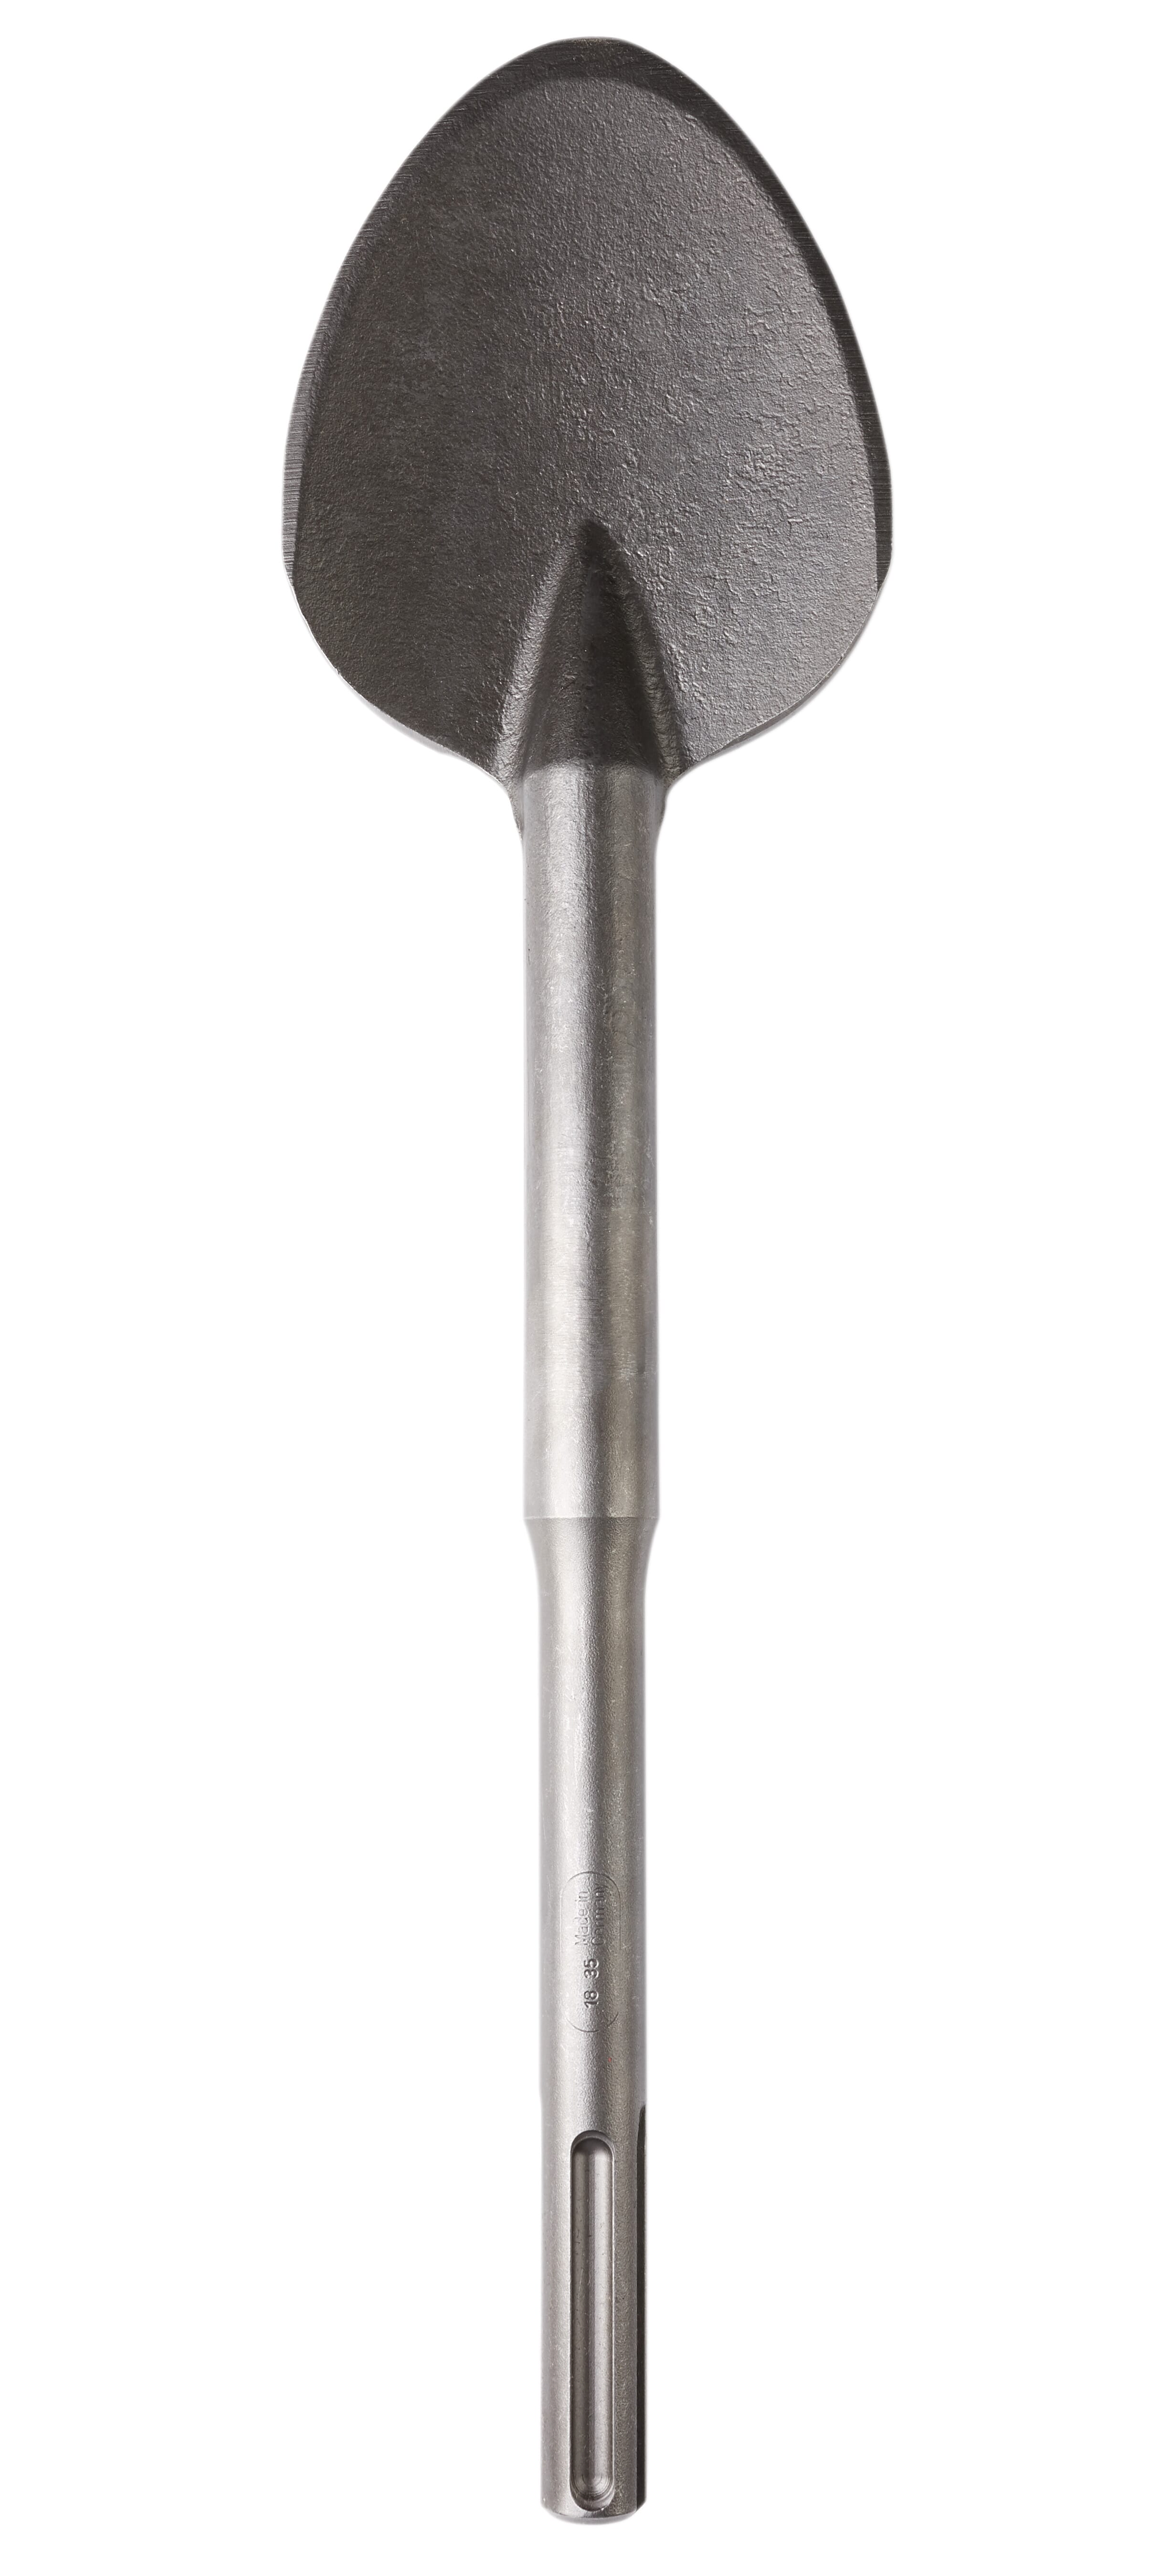 Milwaukee® 48-62-4091 Ground Rod Driver, For Use With SDS Max® 5315-21 Rotary Hammer, 5446-21 and 5339-21 Demolition Hammer, 9-3/4 in OAL, Slotted, 18 mm Round Shank, 2-3/4 in D Socket, 0.906 in ID, 5/8 x 3/4 in Dia Rod